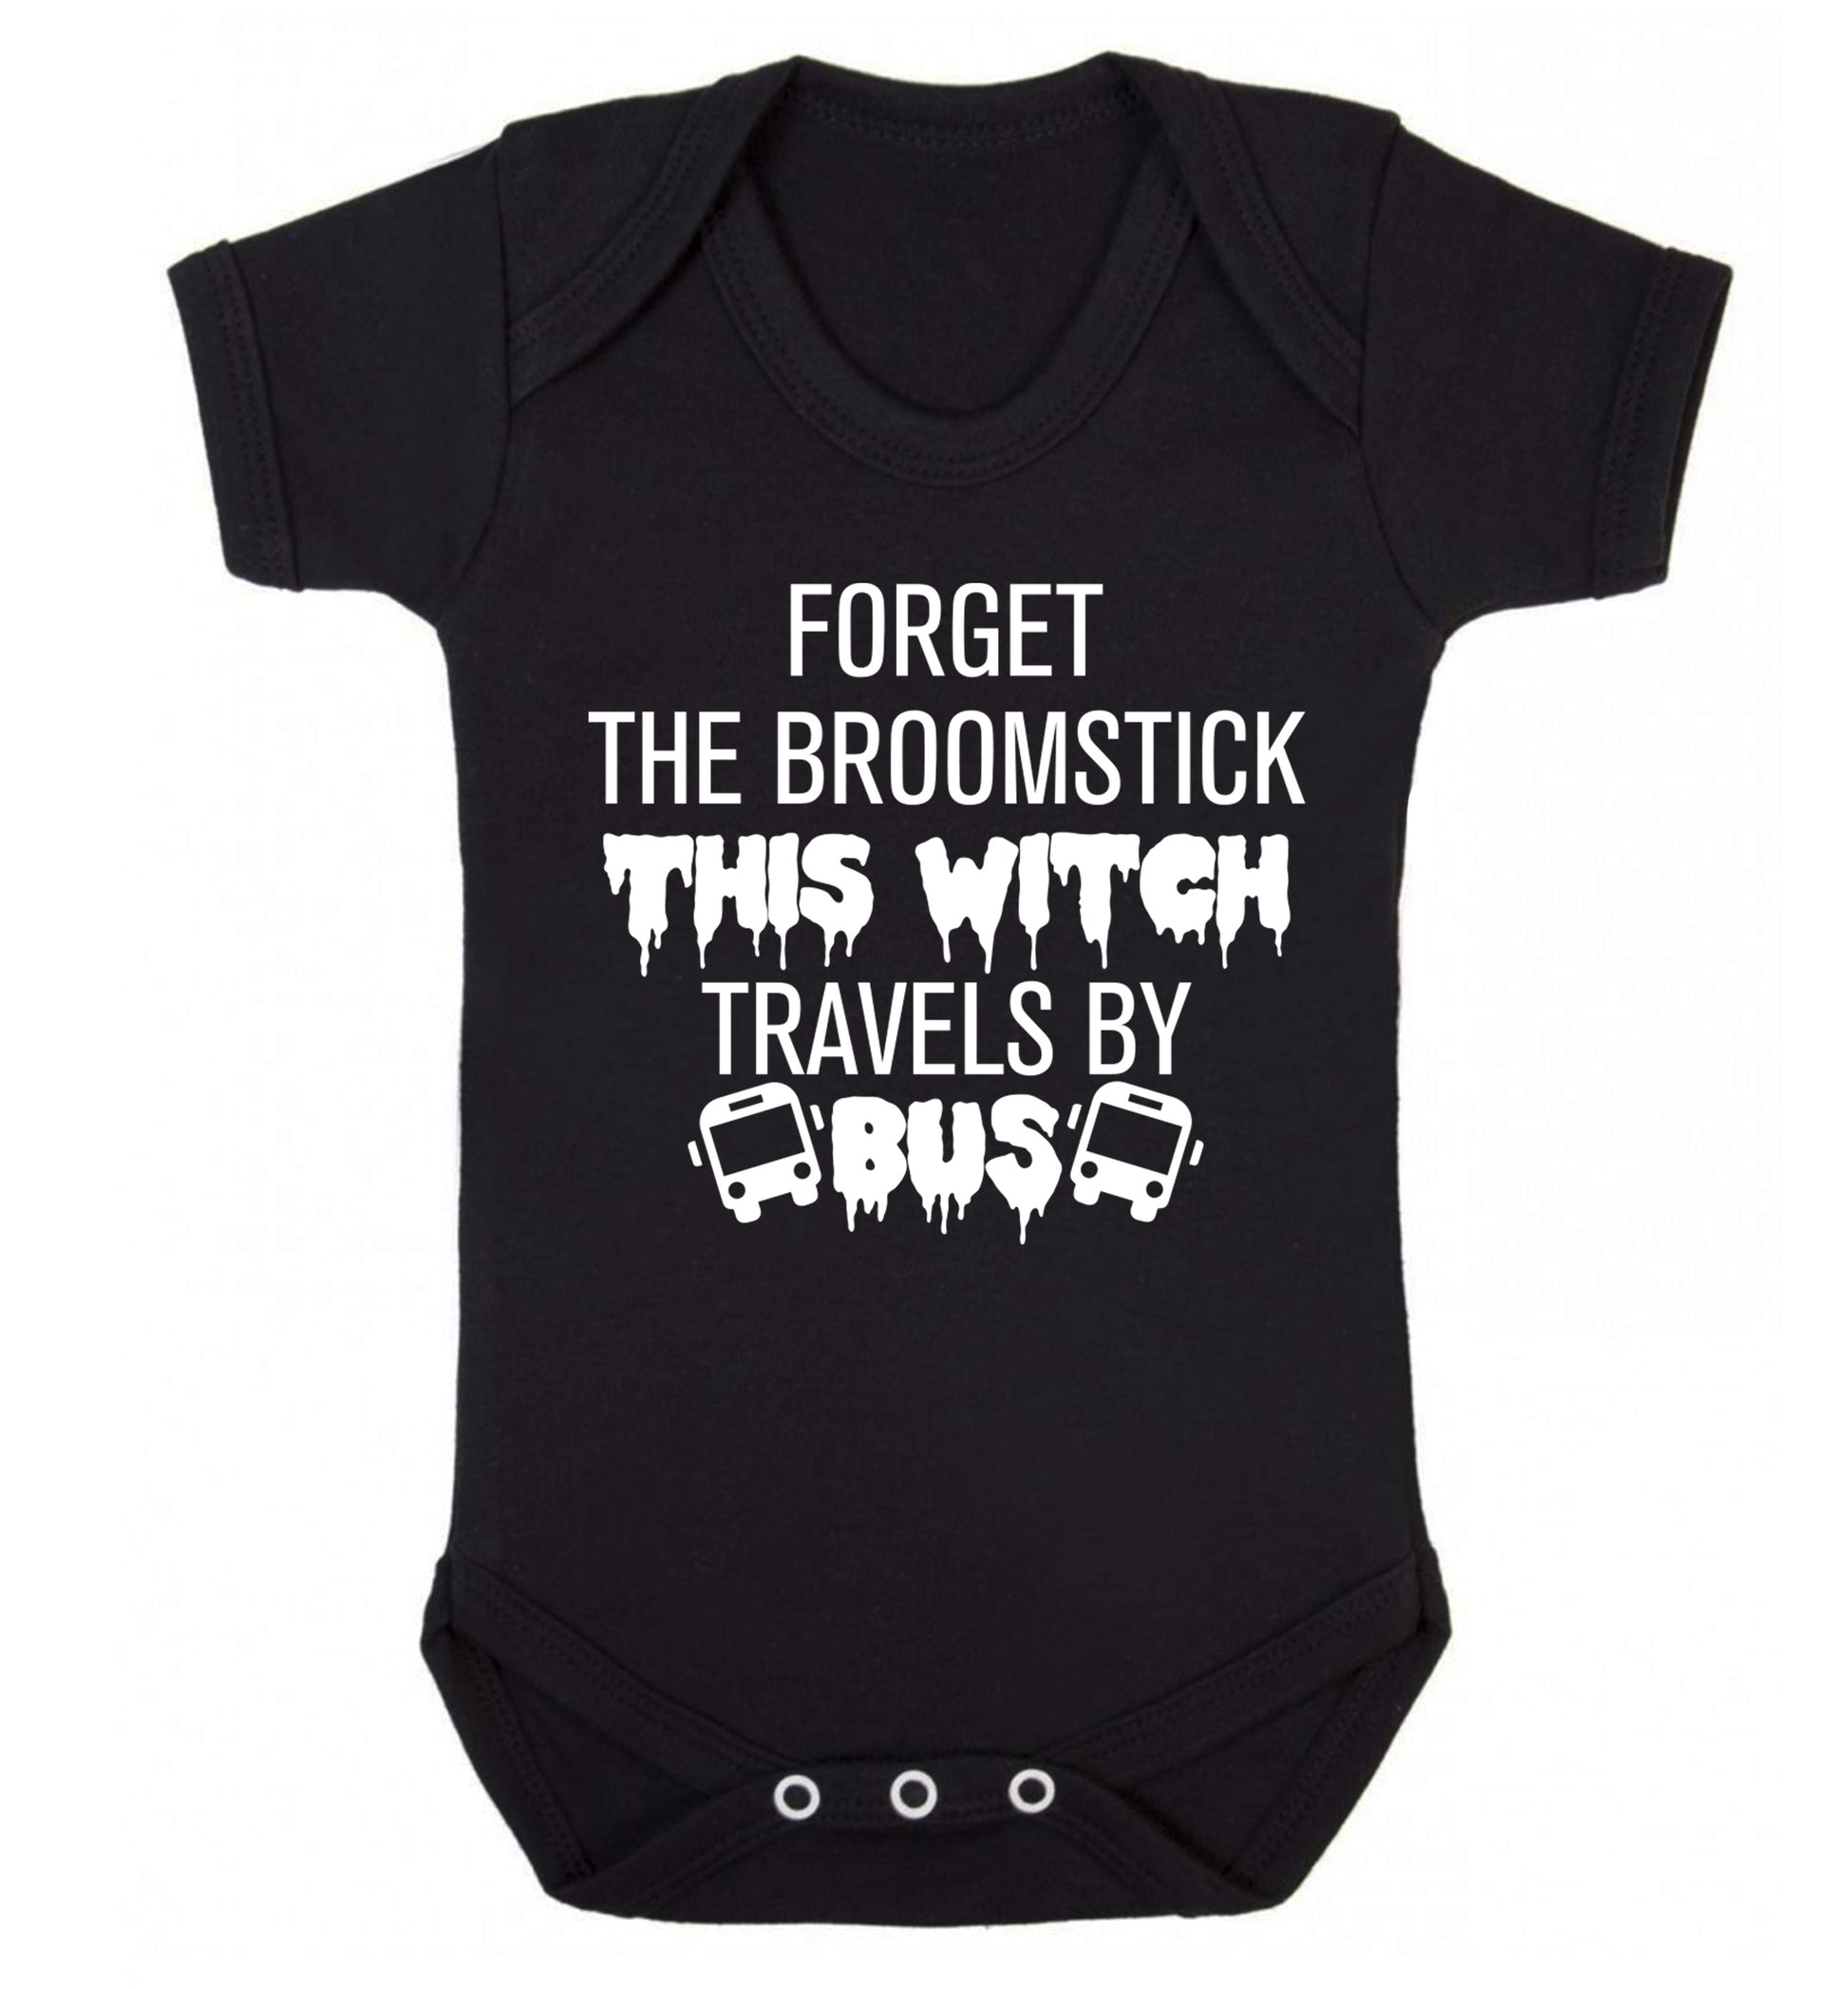 Forget the broomstick this witch travels by bus Baby Vest black 18-24 months